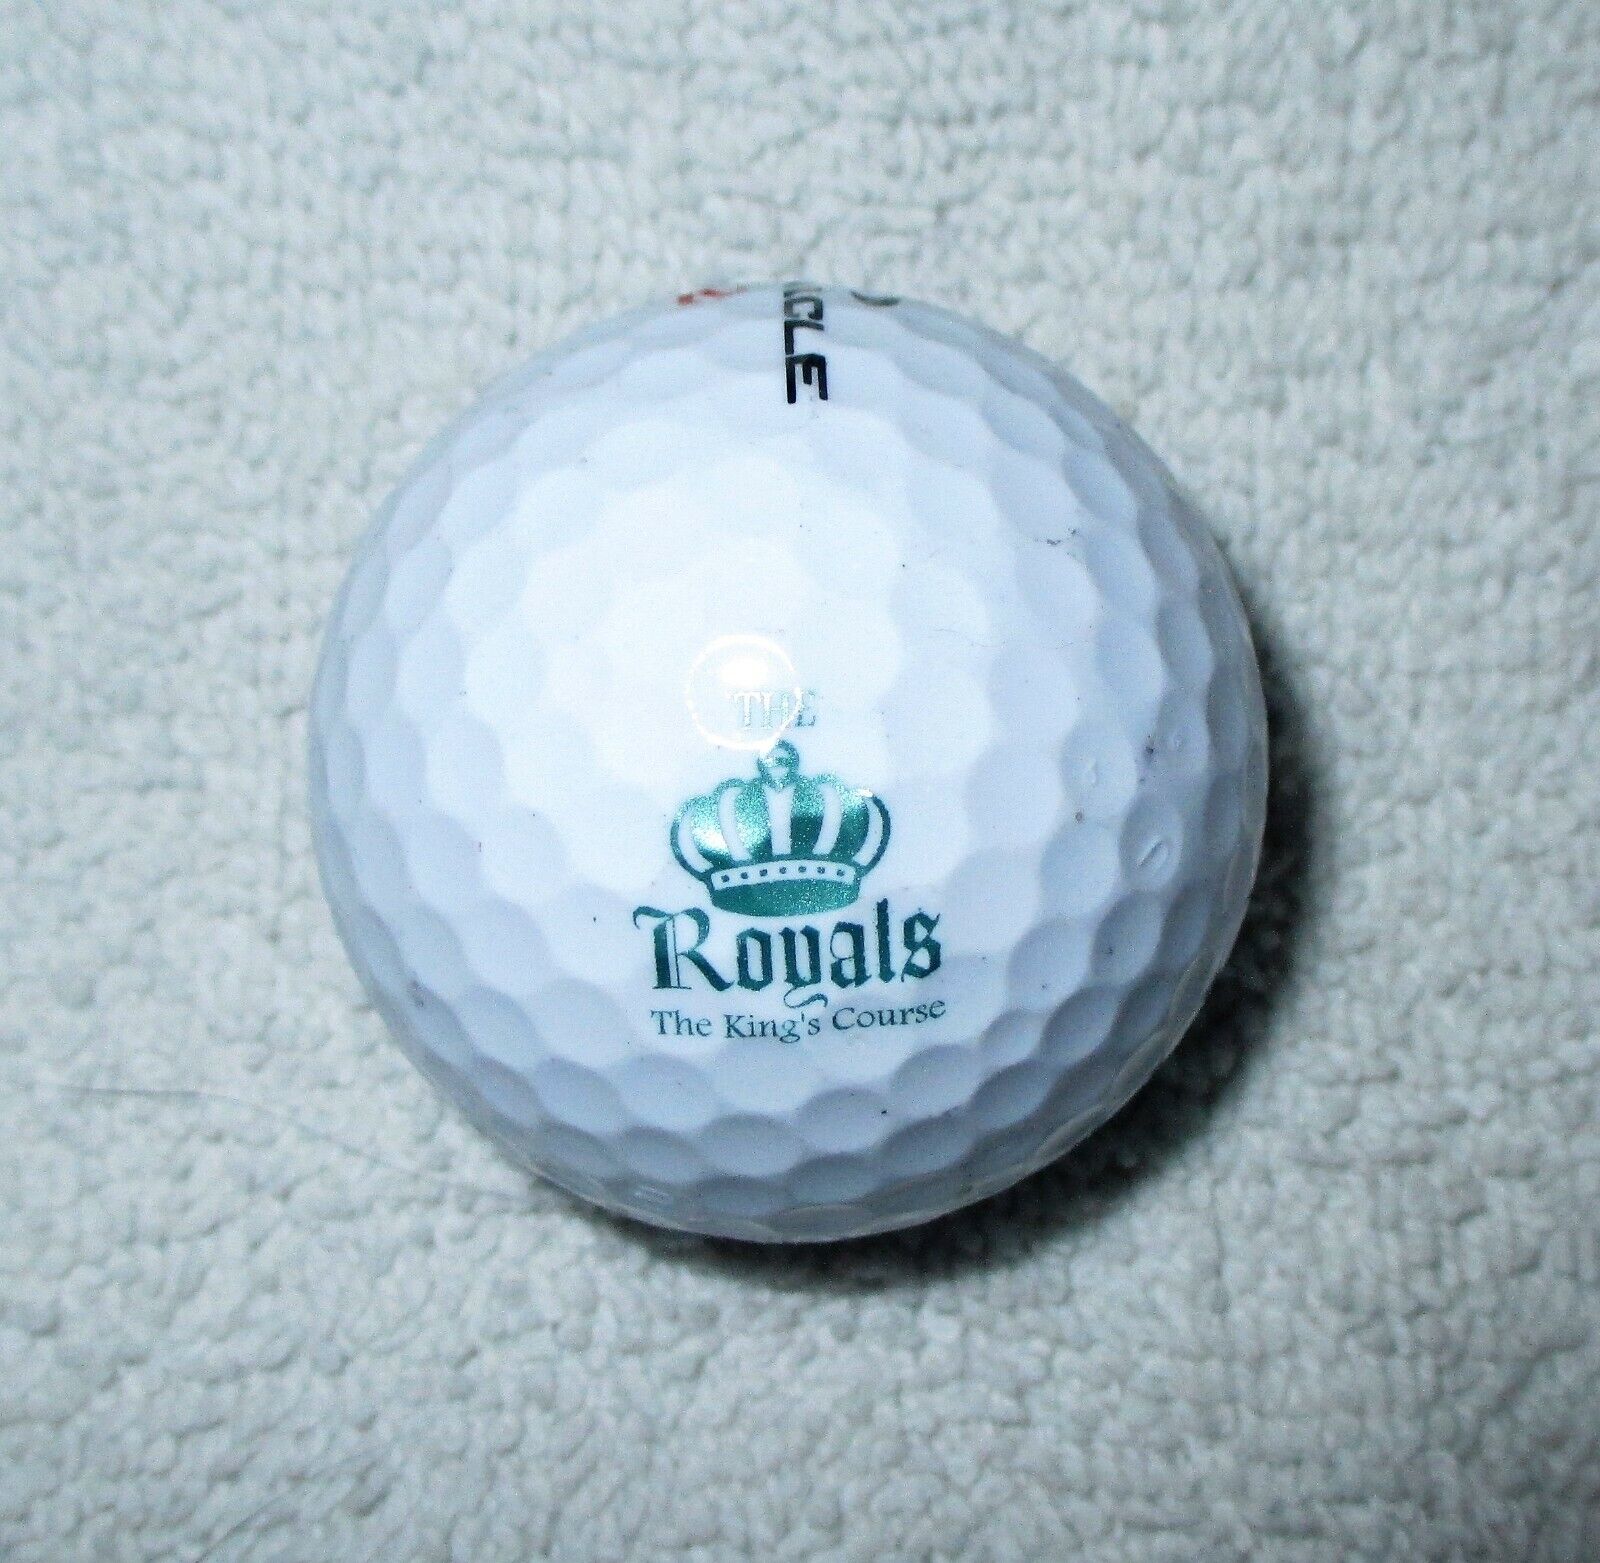 The Royals The King\'s Course Pinnacle Logo Golf Ball 